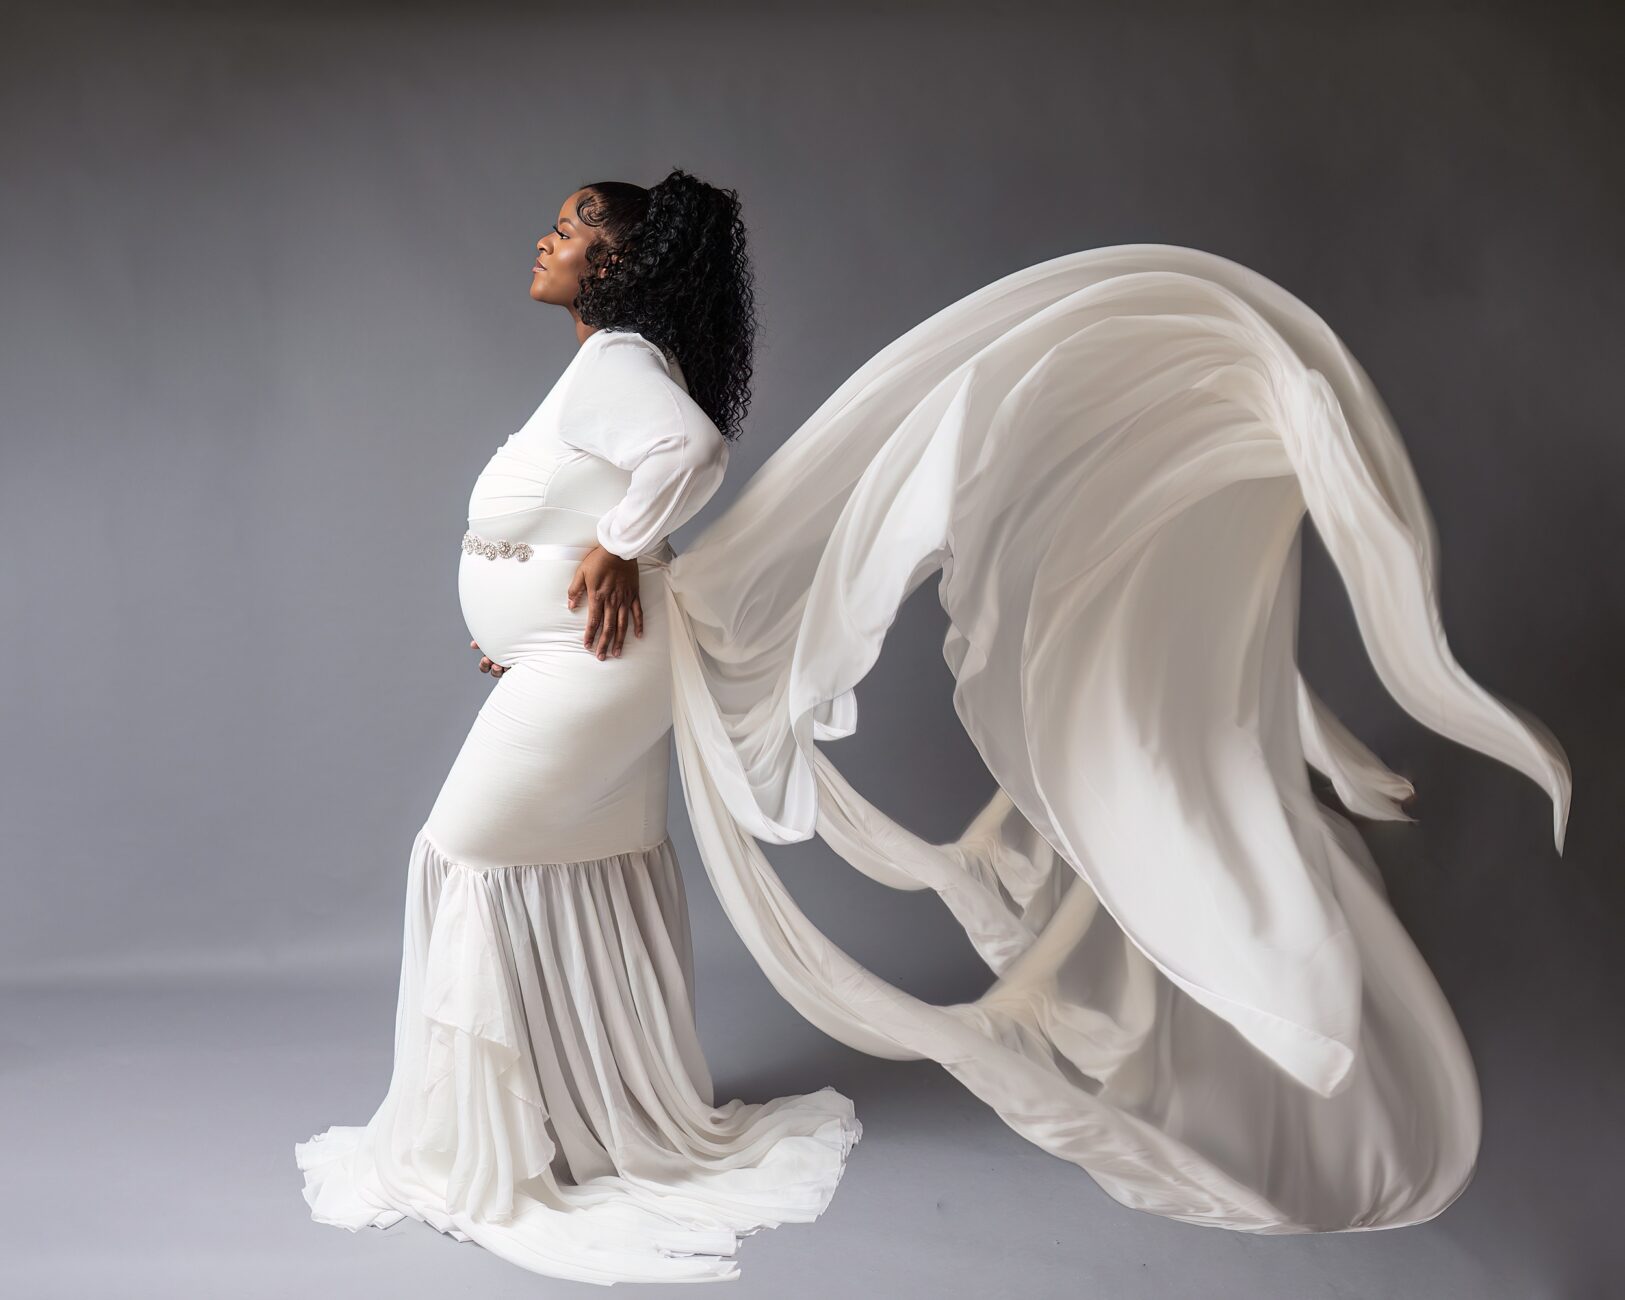 A mom to be in a white maternity gown stands in a studio with her train flowing behind her Canton Women's Center